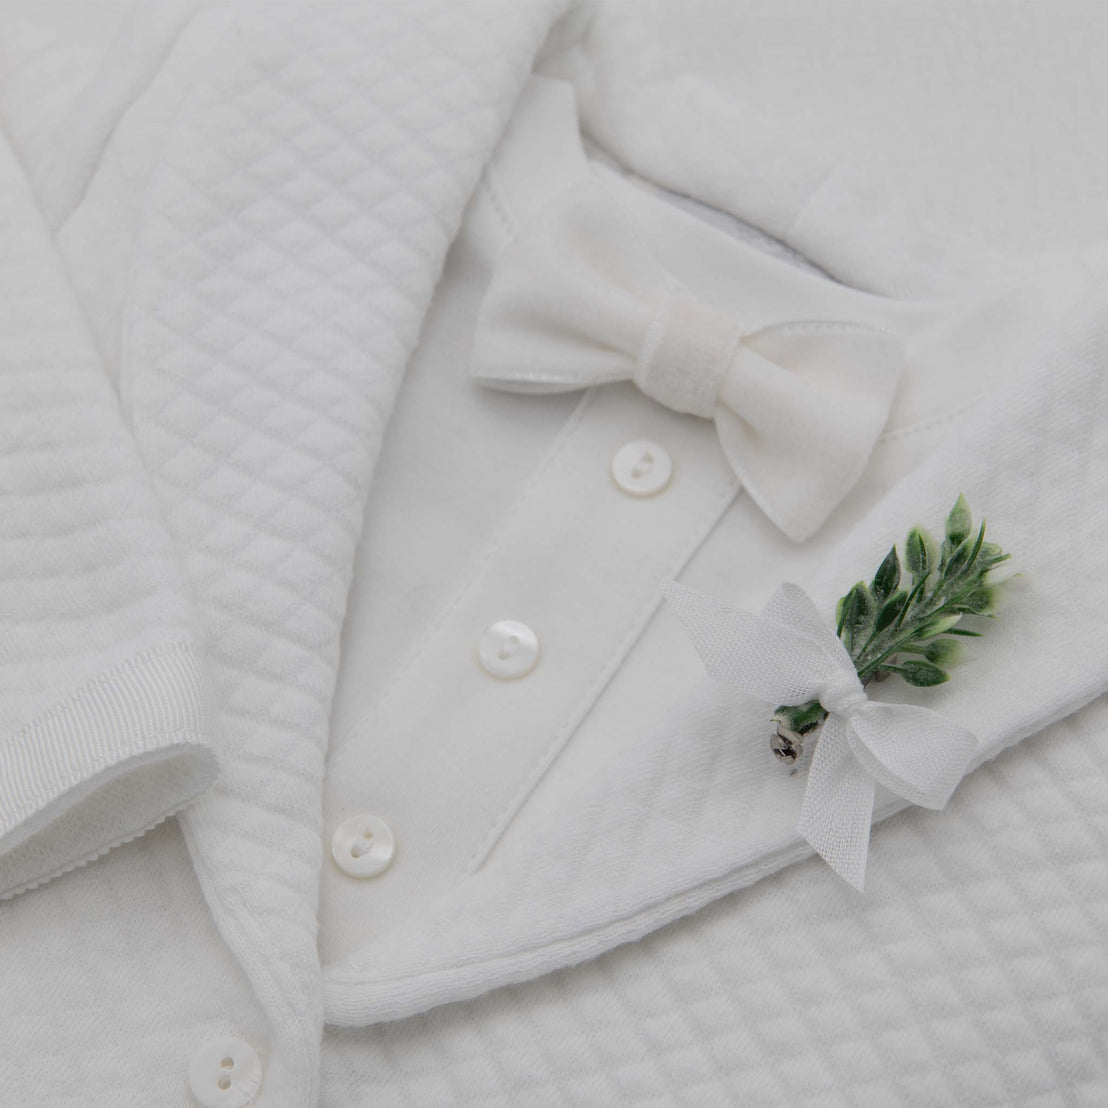 Flat lay photo of the White Velvet Bow Tie and Boutonniere that is attached to his suit